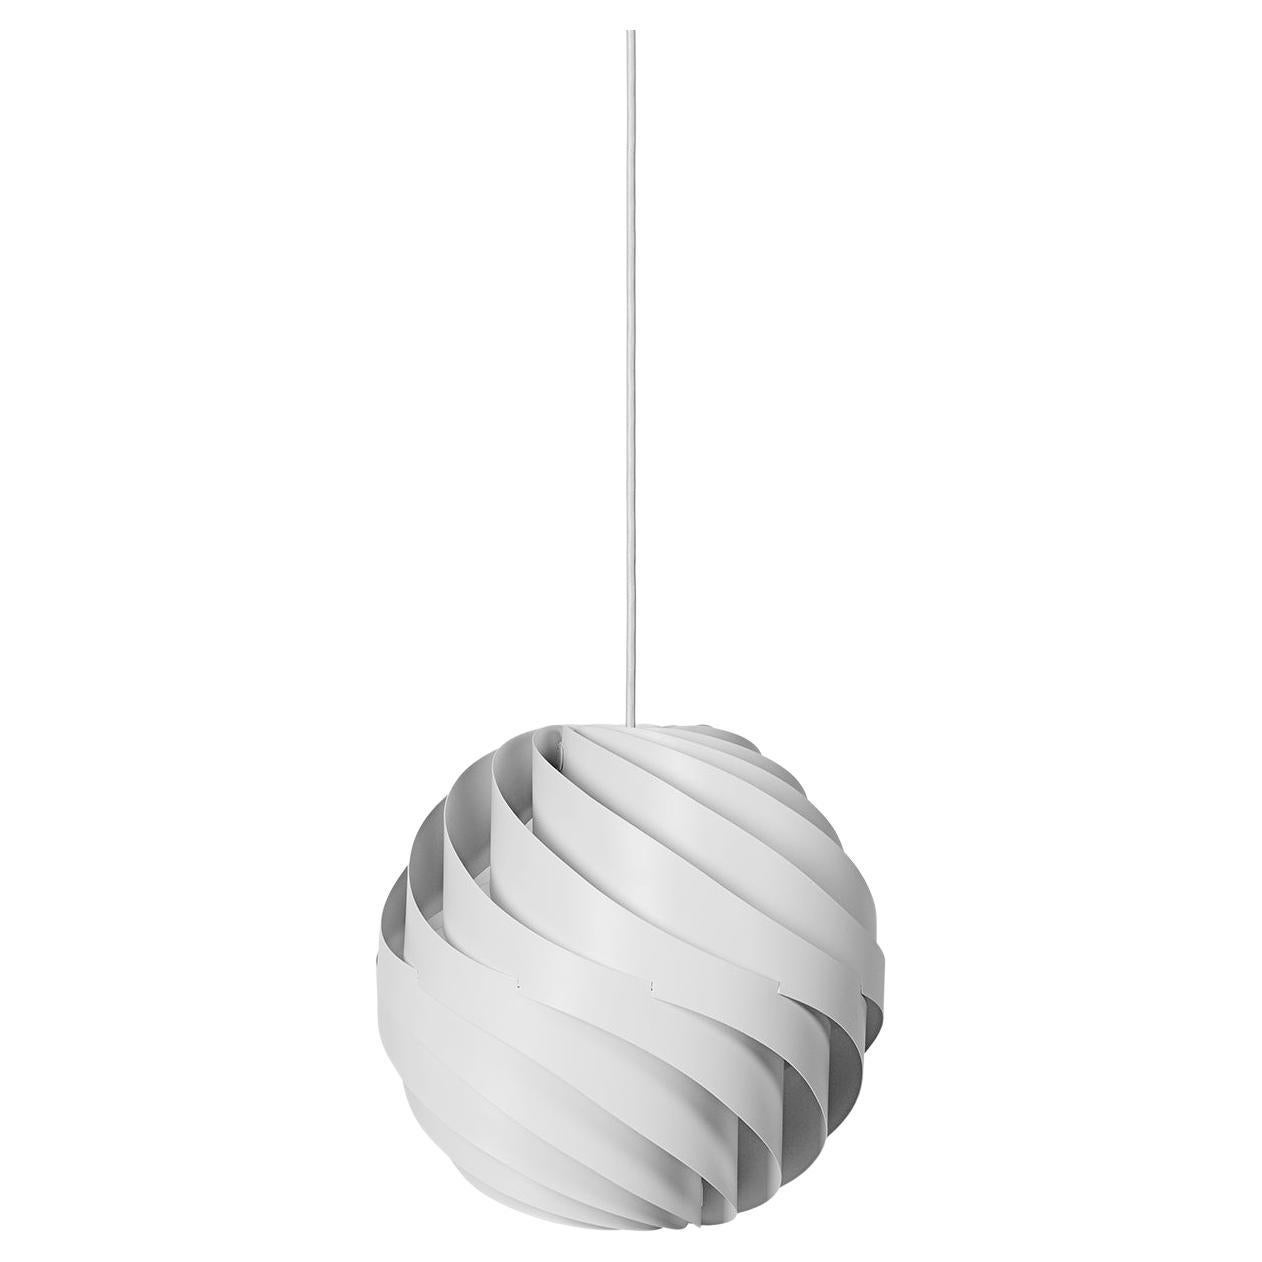 Louis Weisdorf's Turbo Pendant was designed in 1965, but first put into production in 1967 and has achieved great success over the years.

It illustrates design at its best: it is simple in form, yet complex in structure and combines a sense of